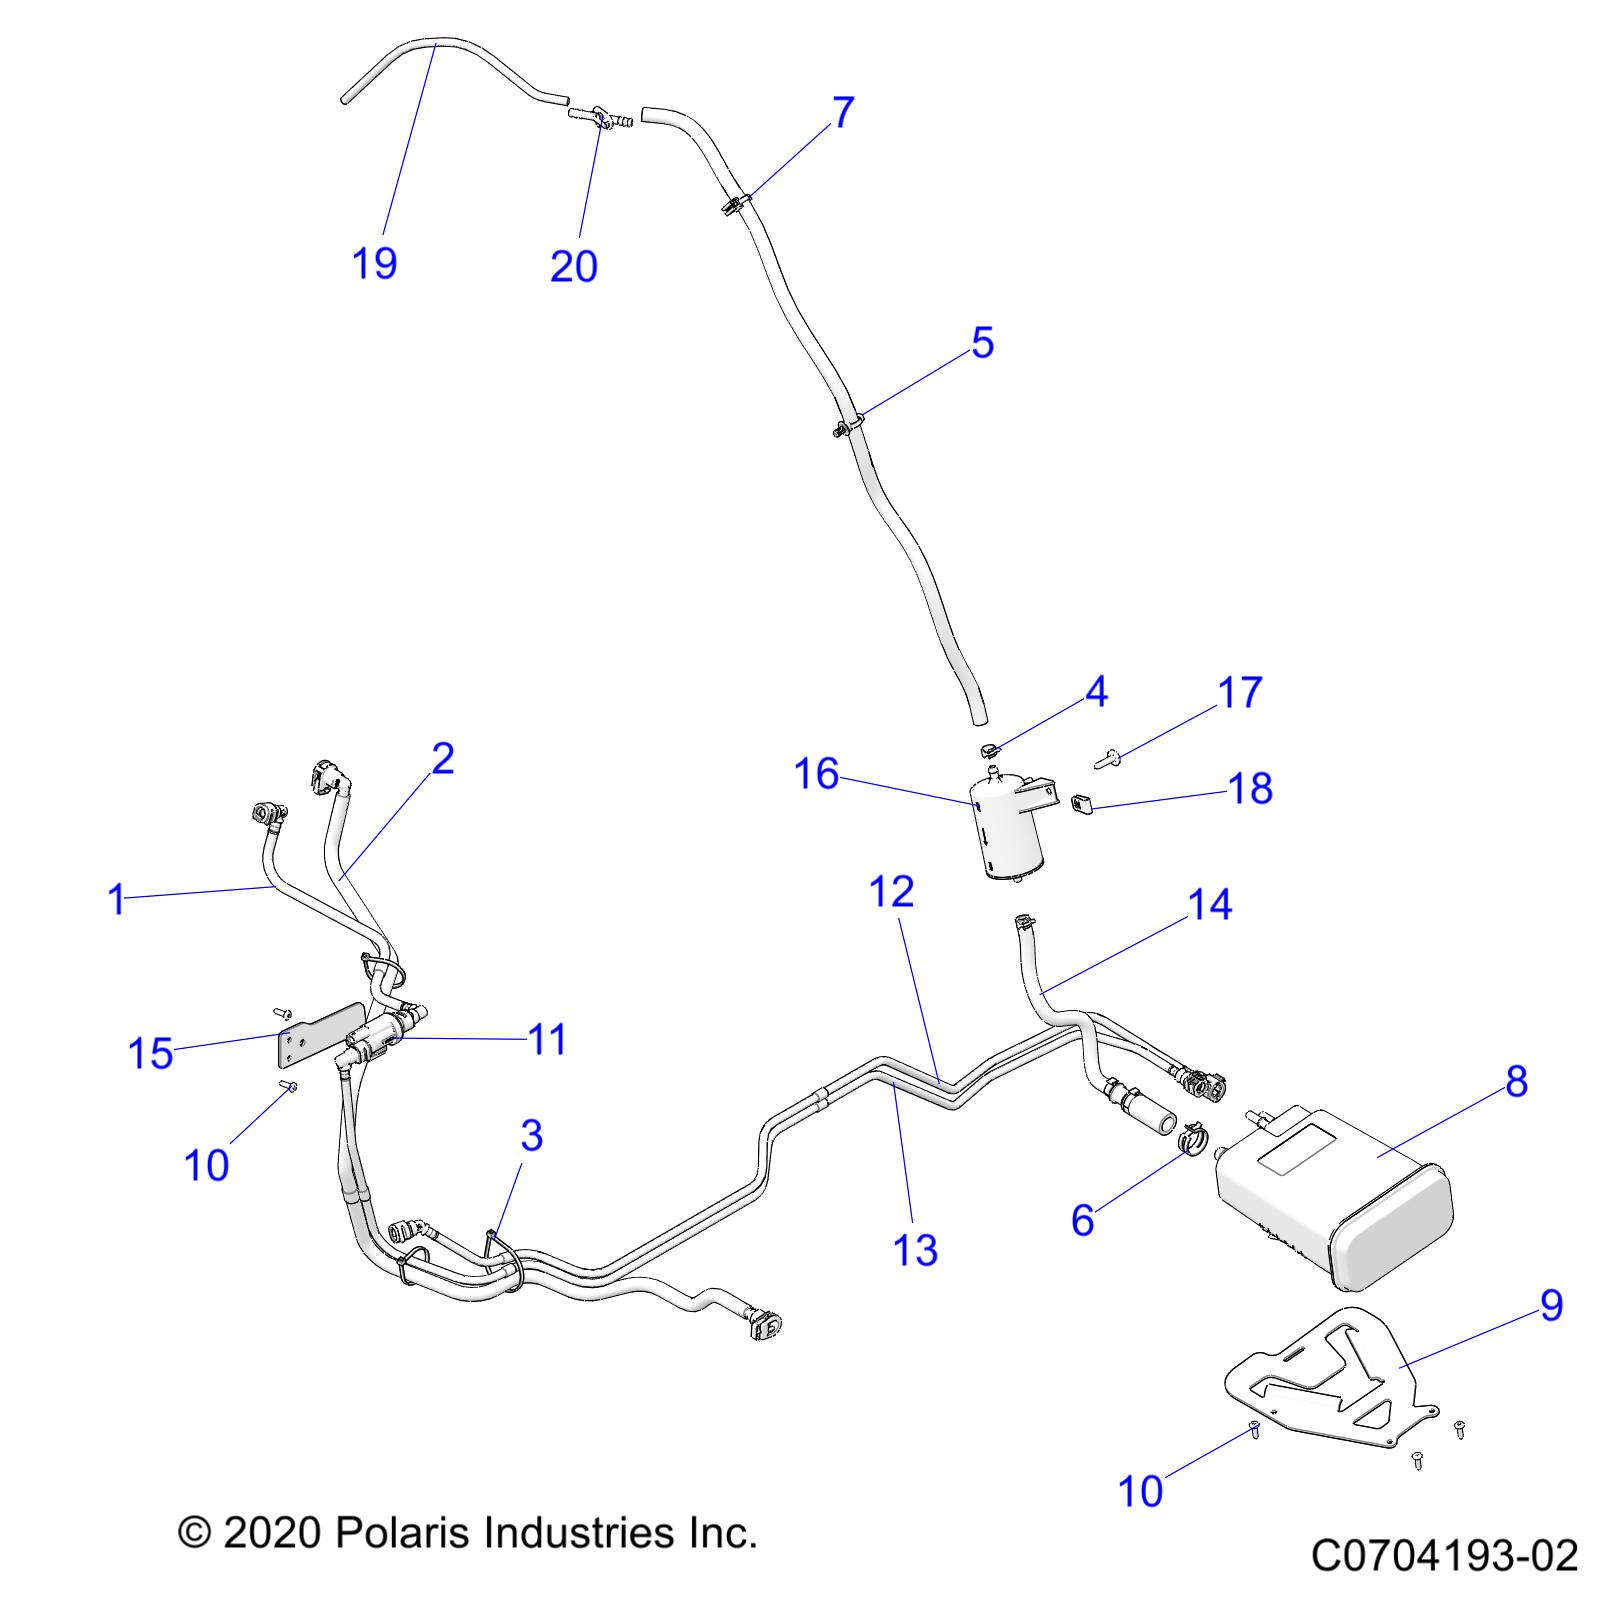 Part Number : 5457446 FITTING-VENT LINE 35